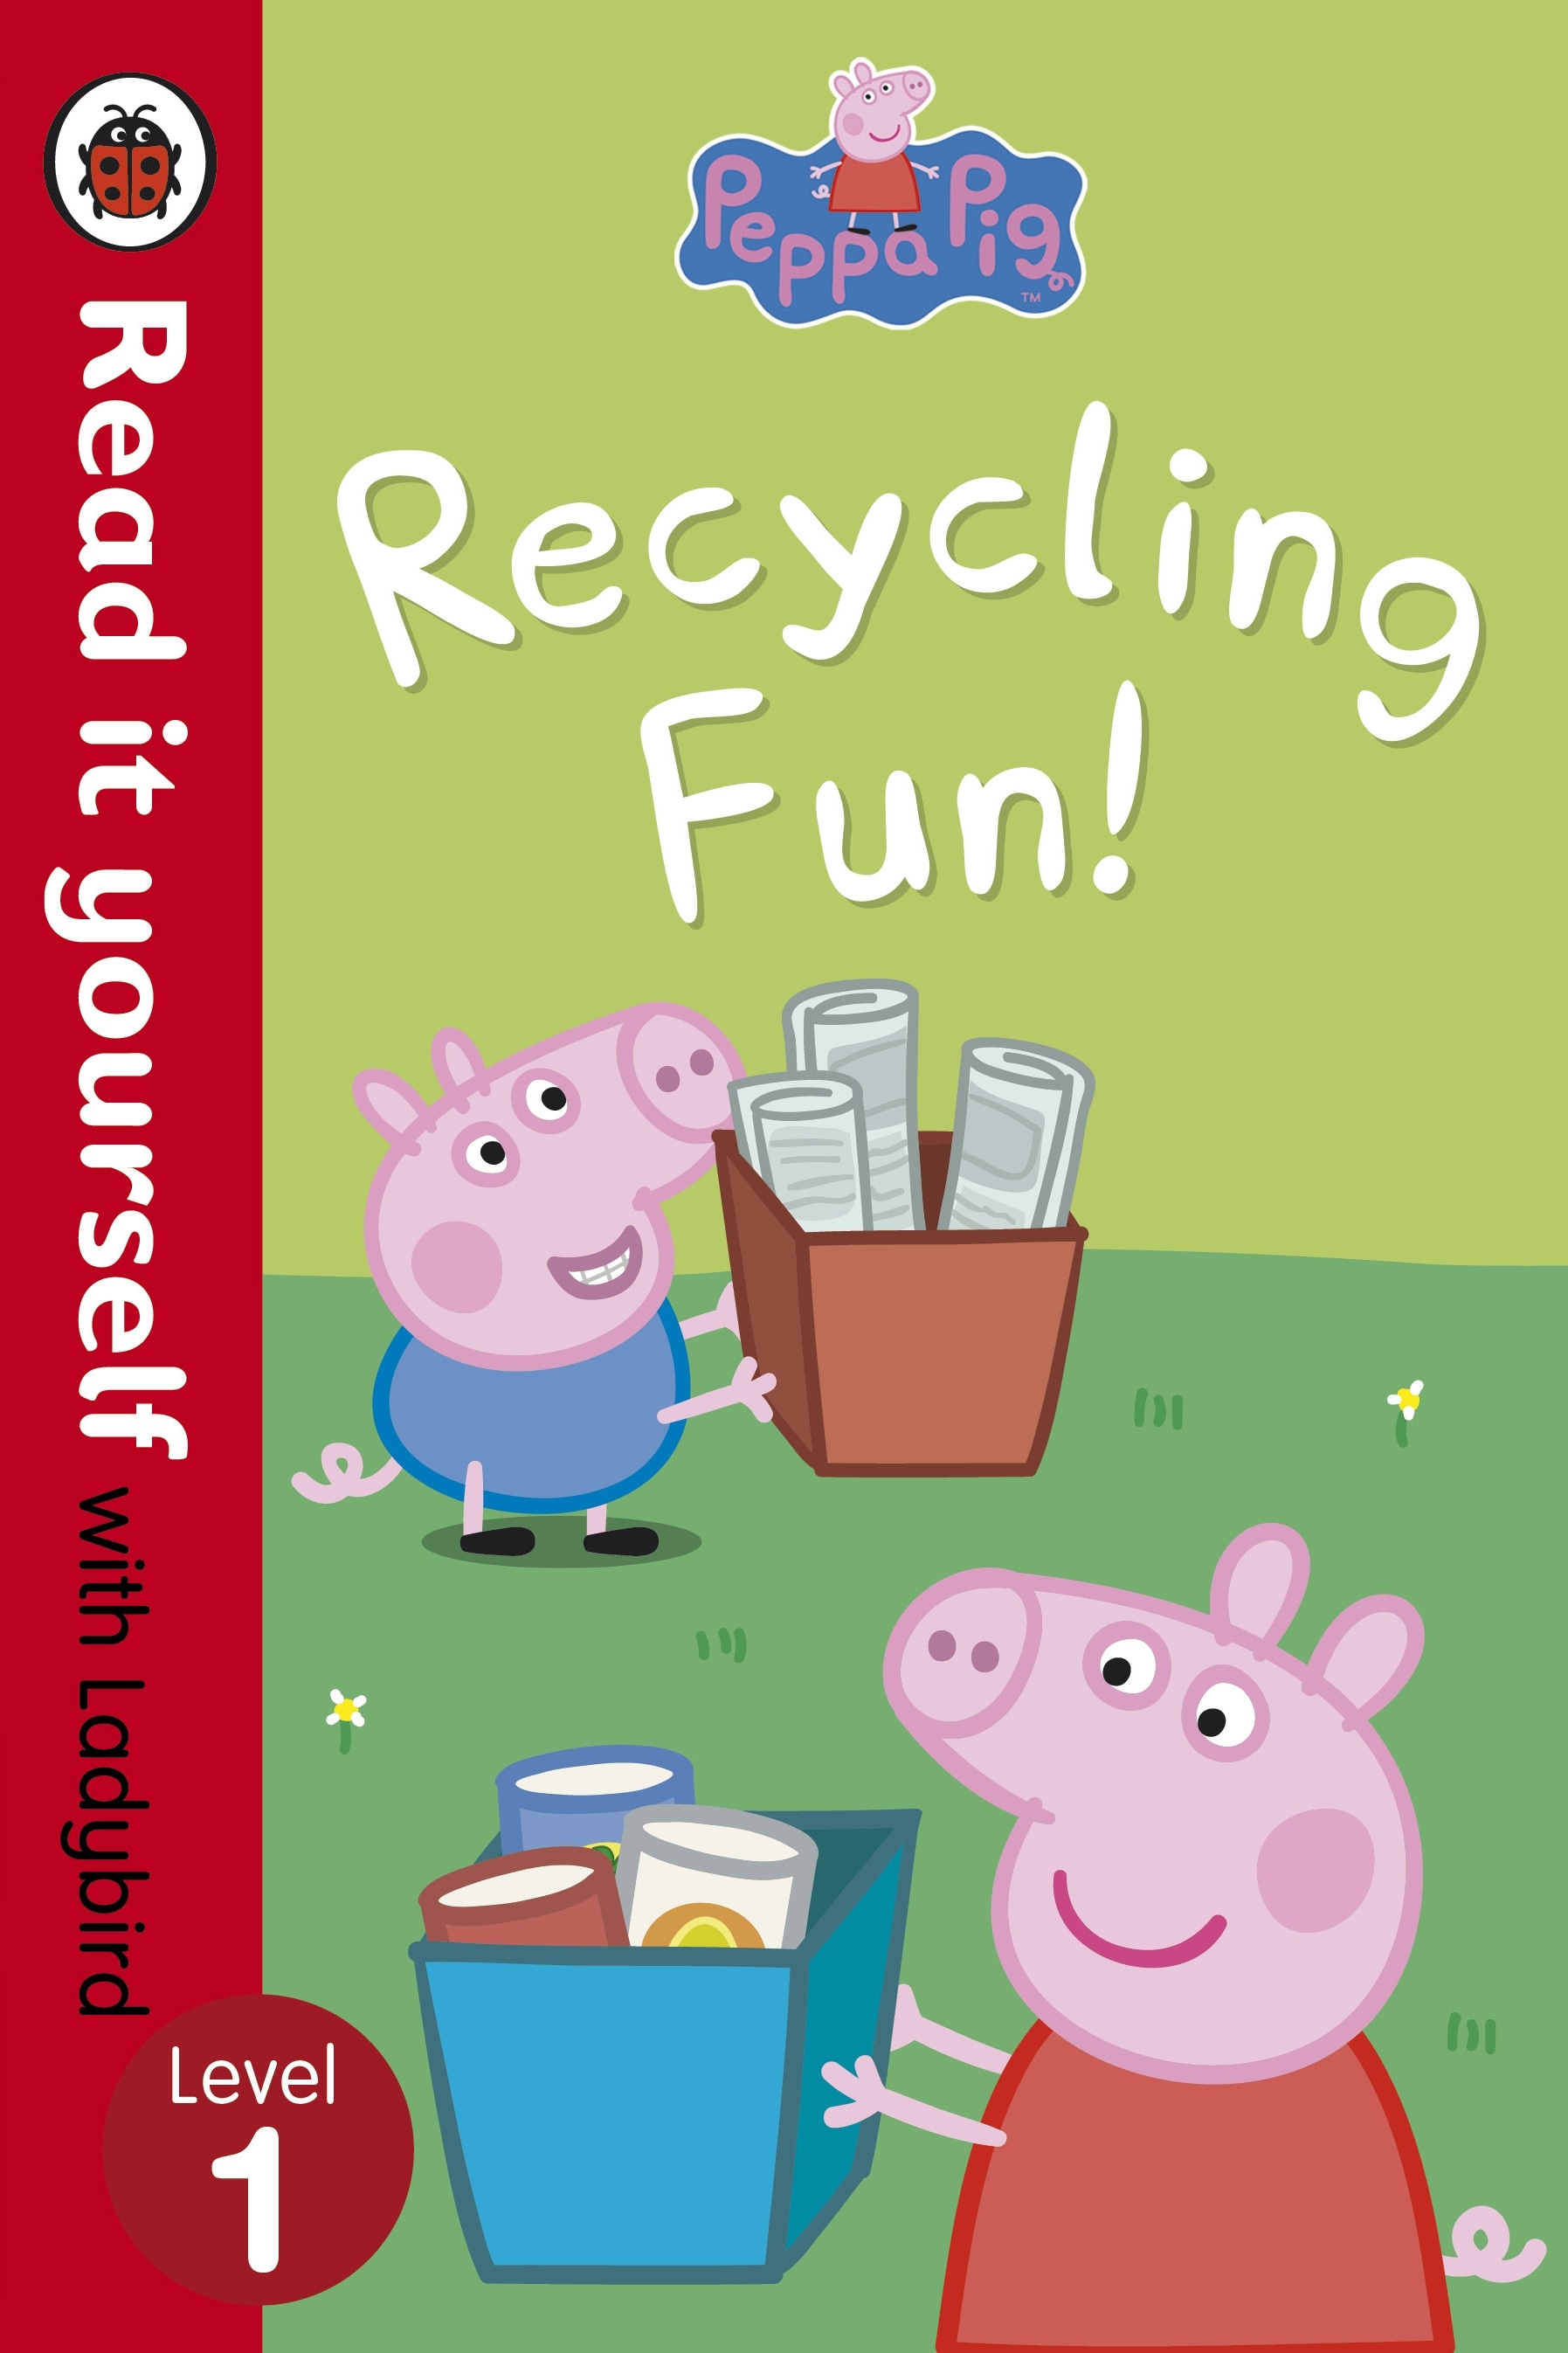 Book “Peppa Pig: Recycling Fun - Read it yourself with Ladybird” by Ladybird, Peppa Pig — July 4, 2013